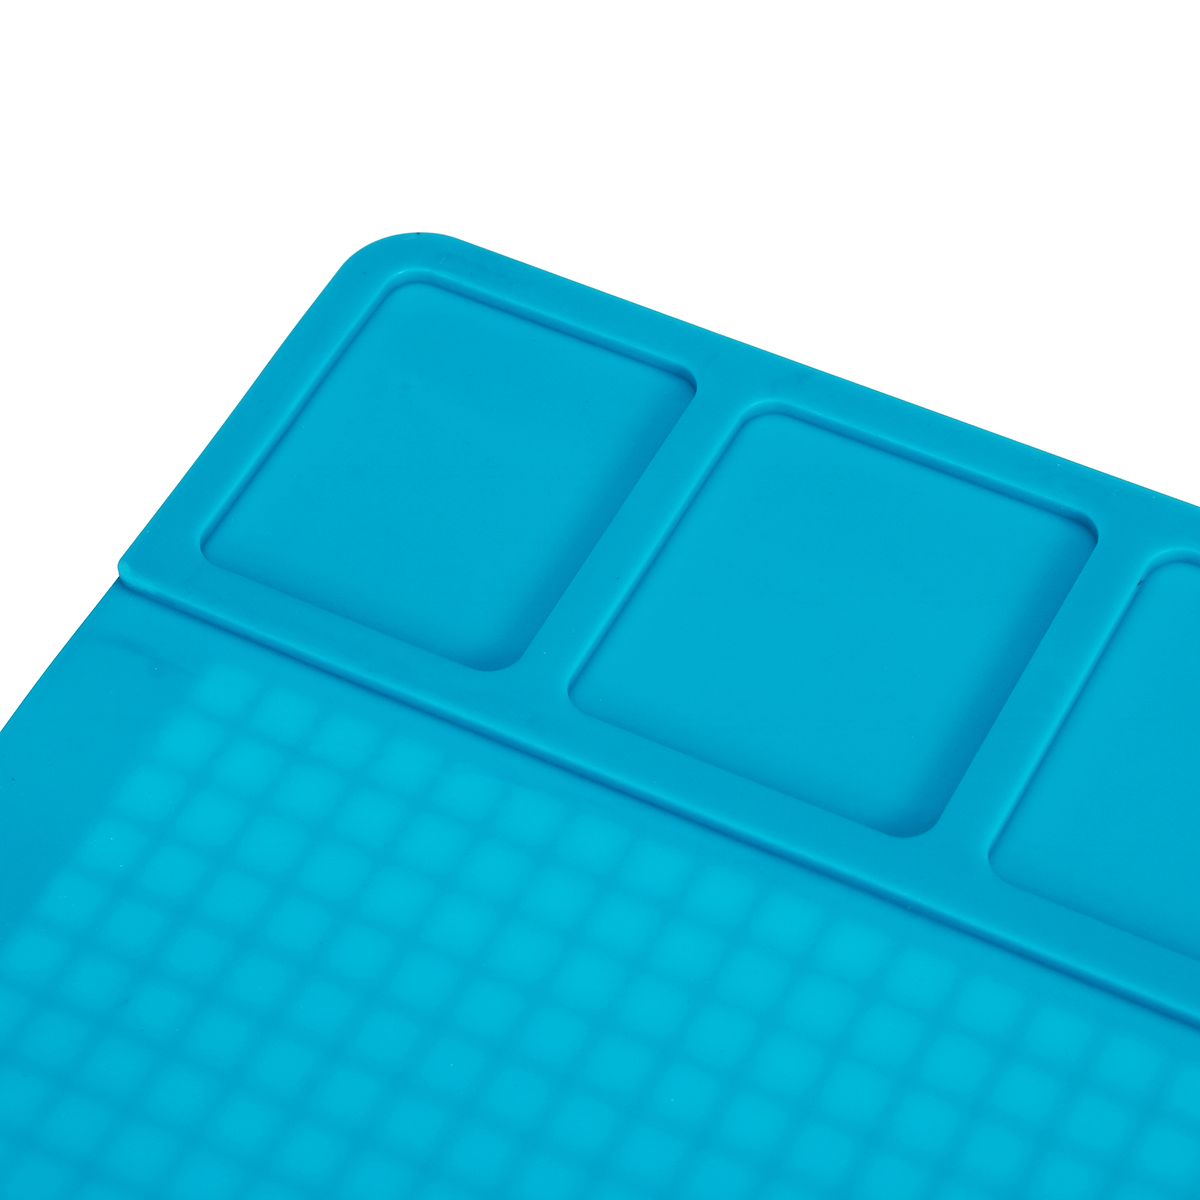 Phone-Repairing-Silicone-Pad-Thermostability-Heat-Insulation-Silica-Gel-Pad-Antistatic-Anticorrosion-1589605